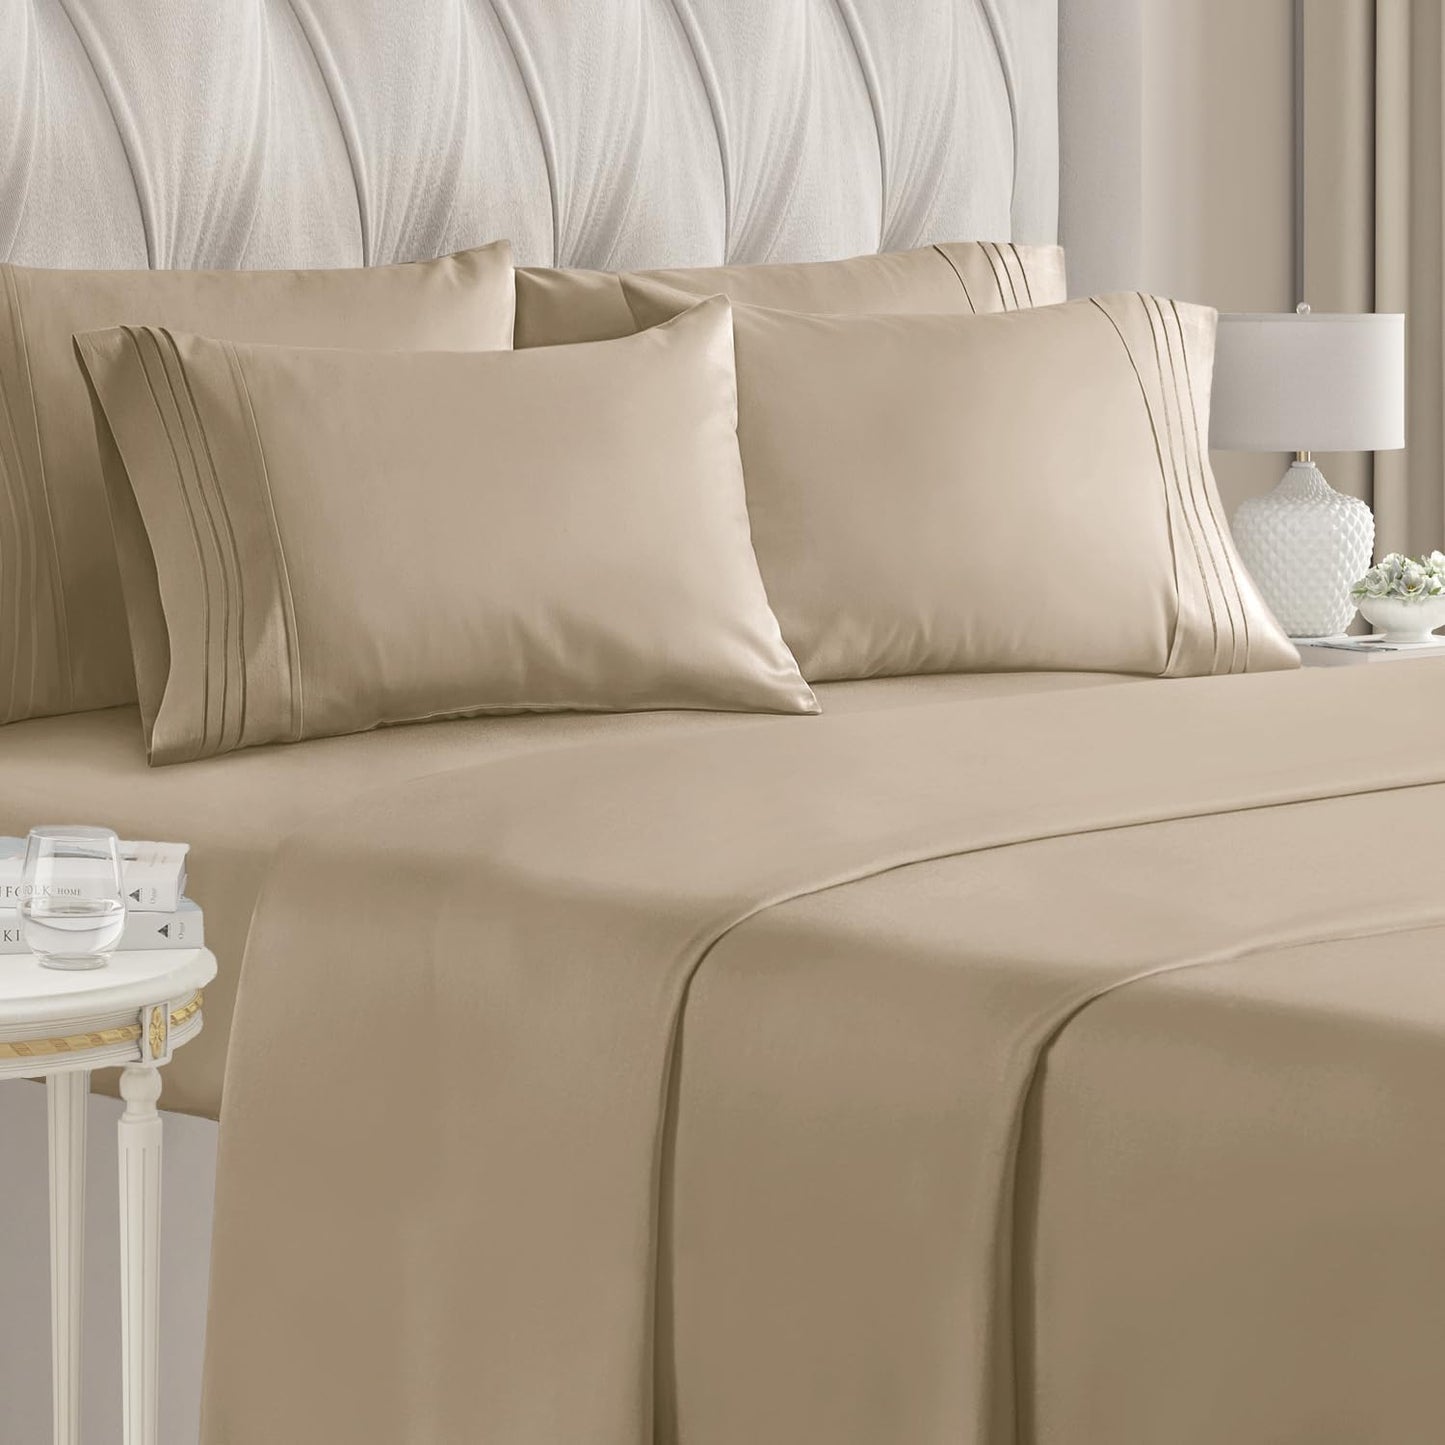 Luxury Ultra-Soft Bed Sheet Set | Hypoallergenic-Deep Pockets-Fade,Wrinkle,Stain Resistant-1800 Thread Count-6 Pieces